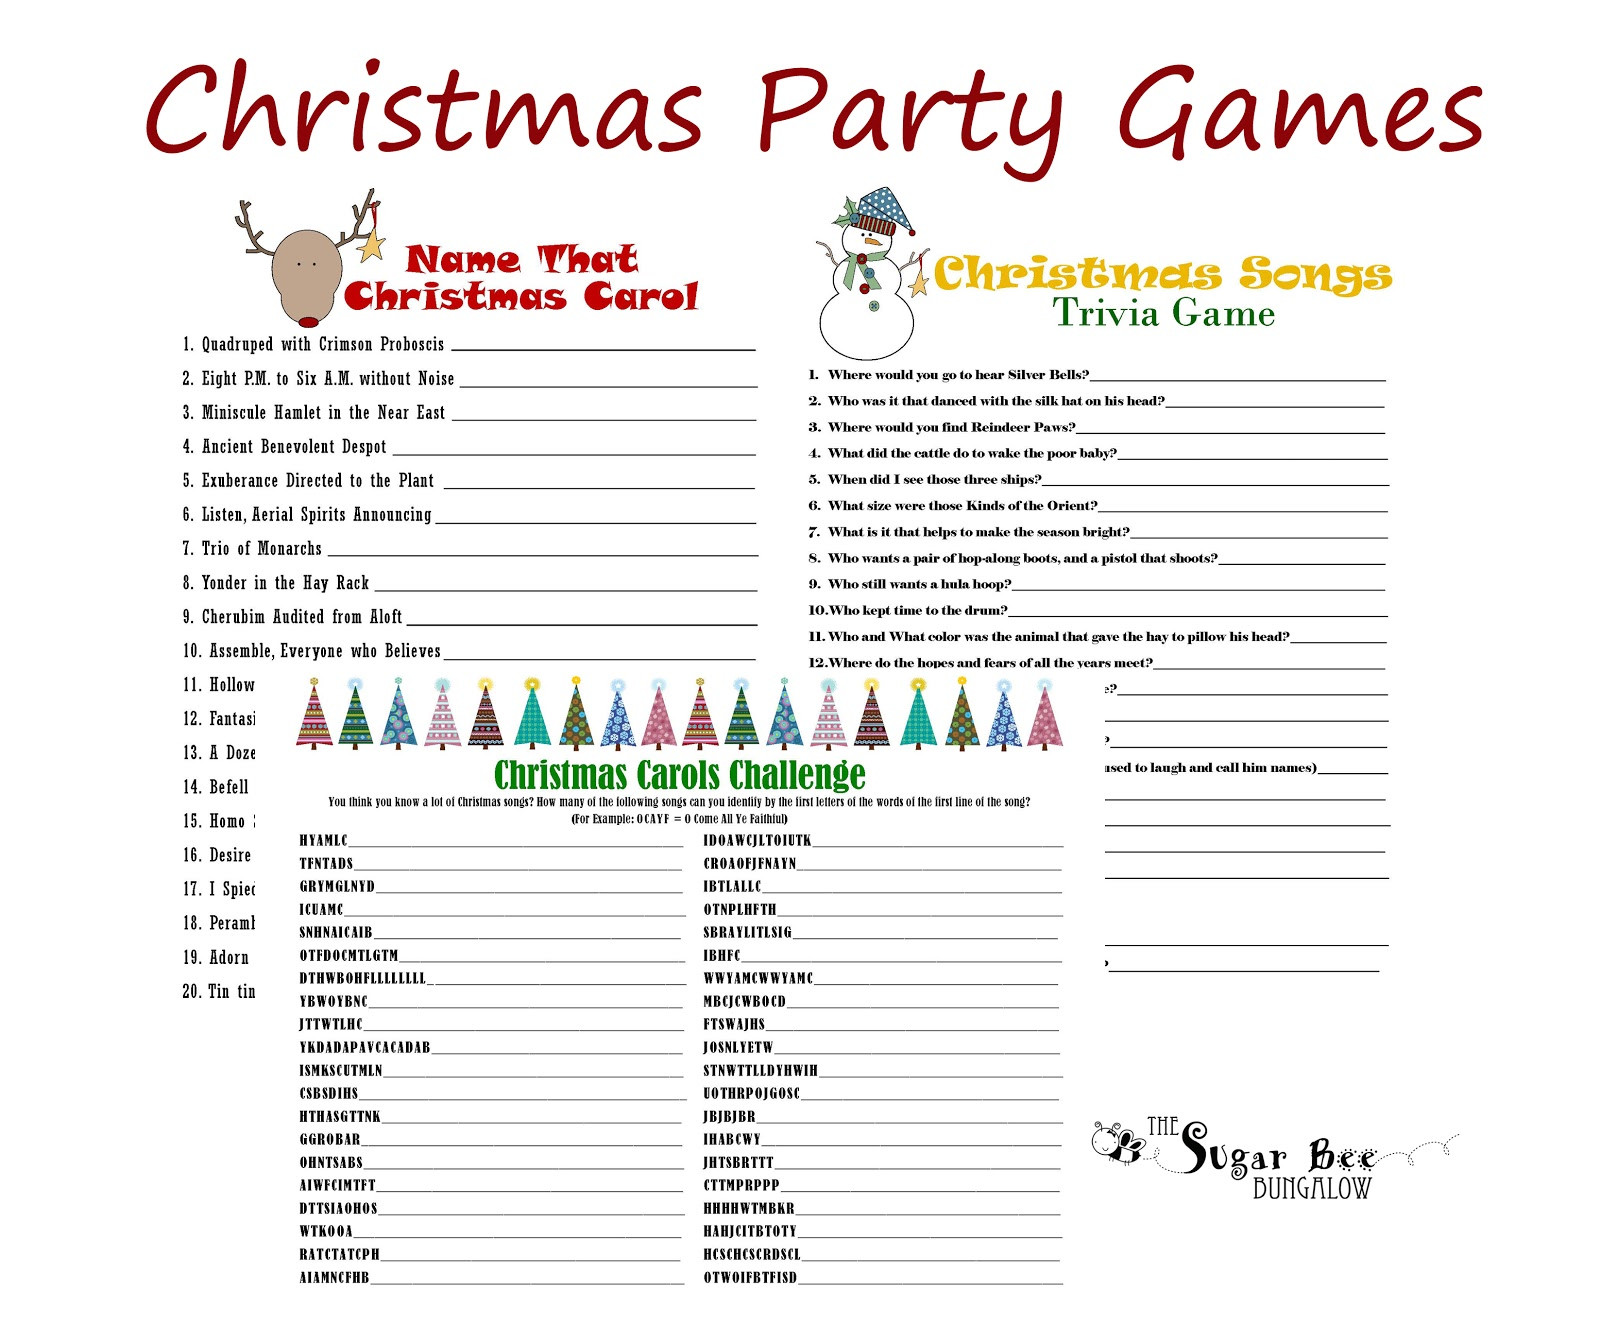 Office Christmas Party Game Ideas
 The Sugar Bee Bungalow December 2012